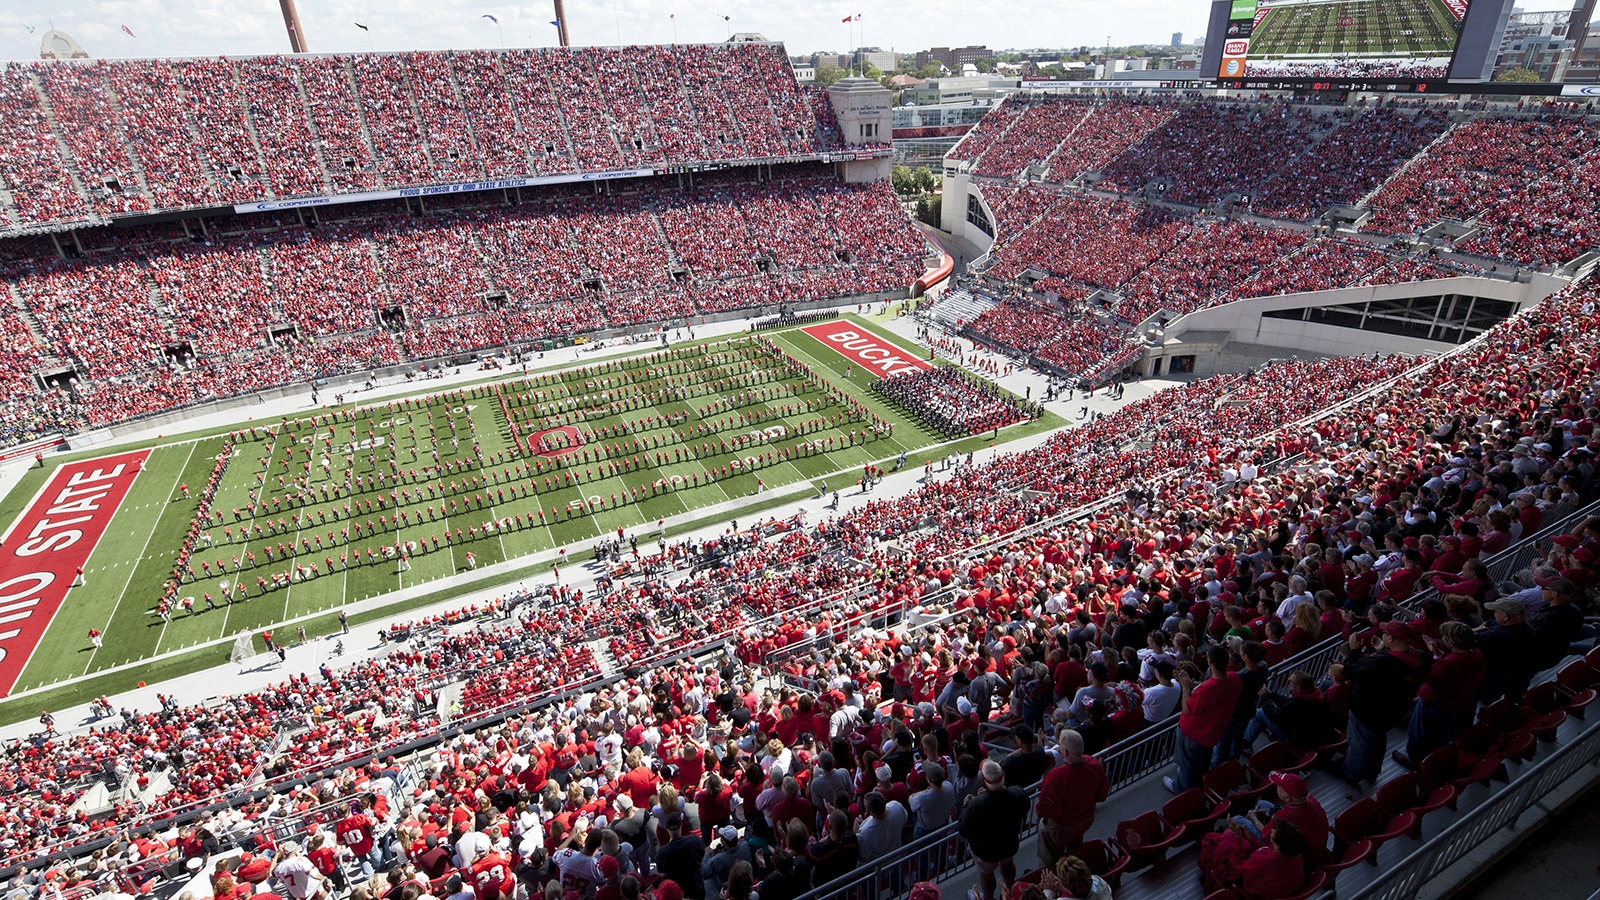 Ohio State University Finishes Undefeated Season with World's First Installation of Meyer Sound LEO